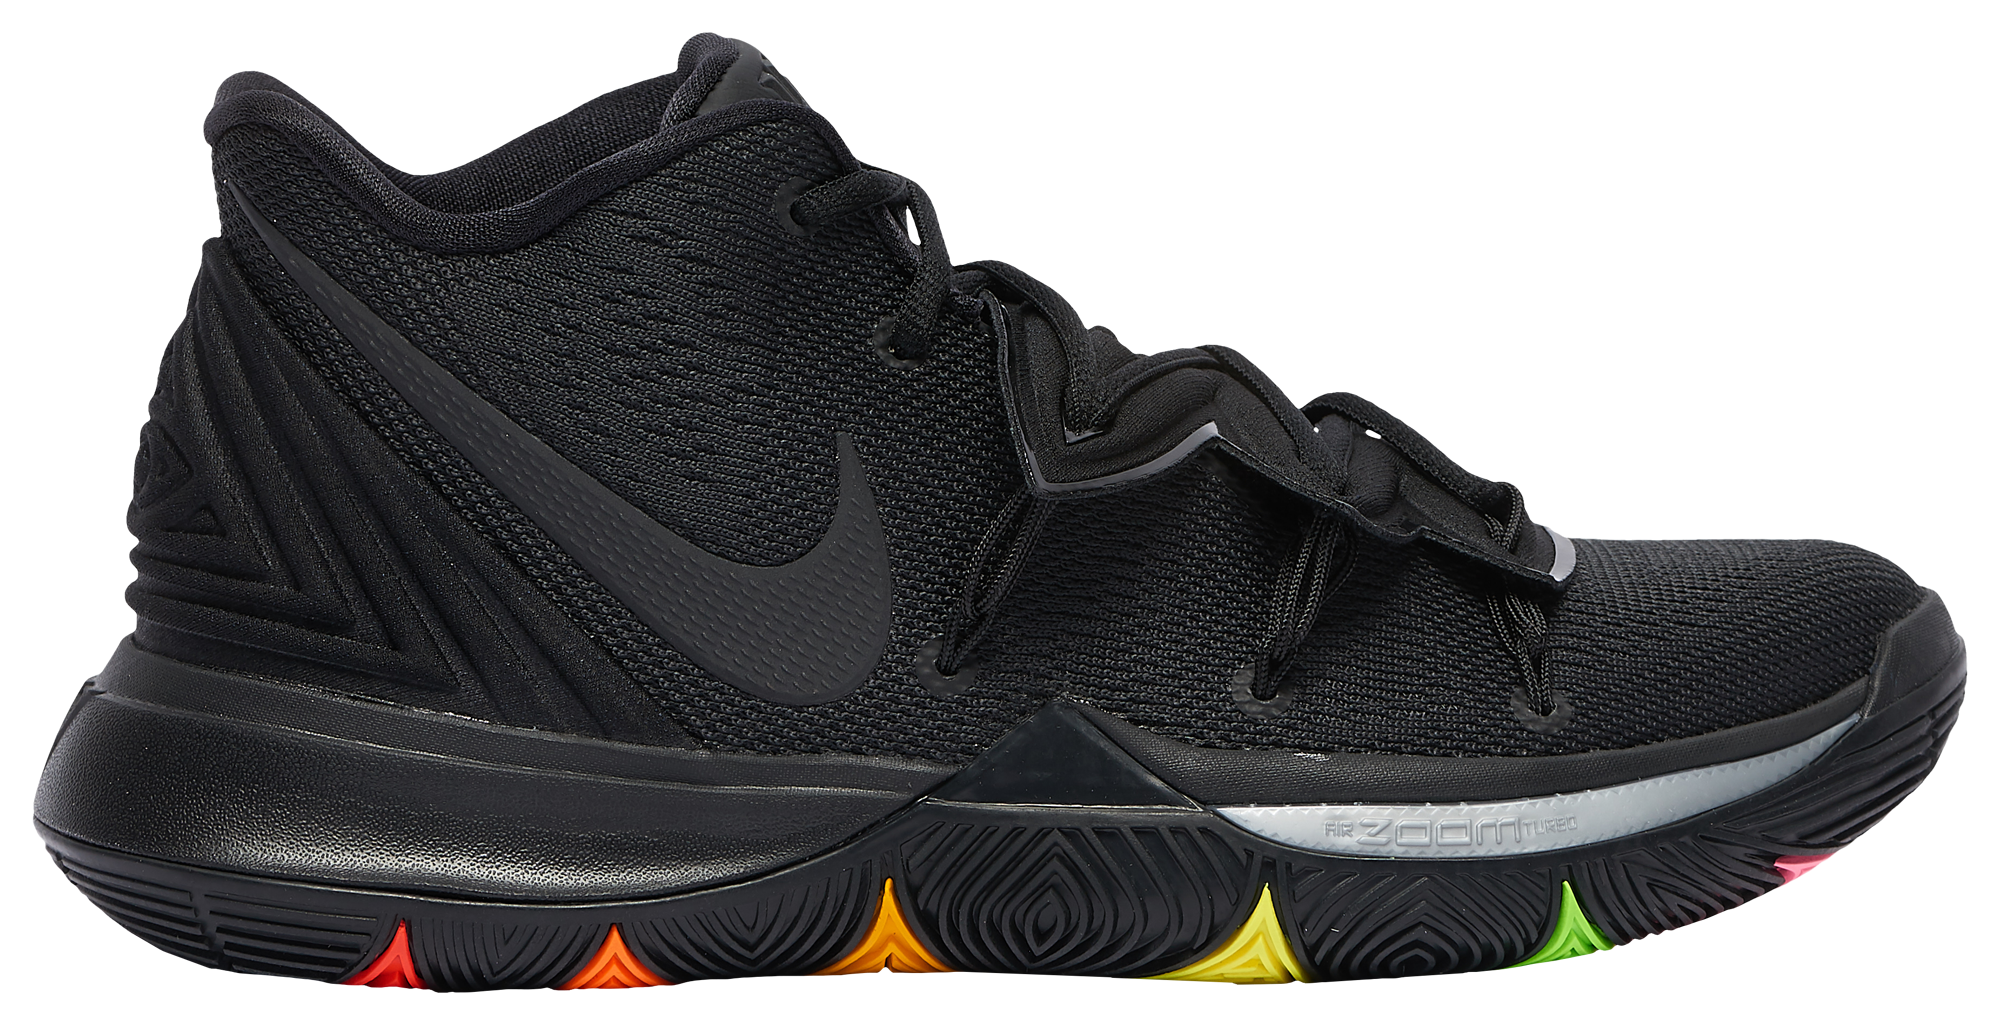 Men's Nike Kyrie Shoes | Champs Sports